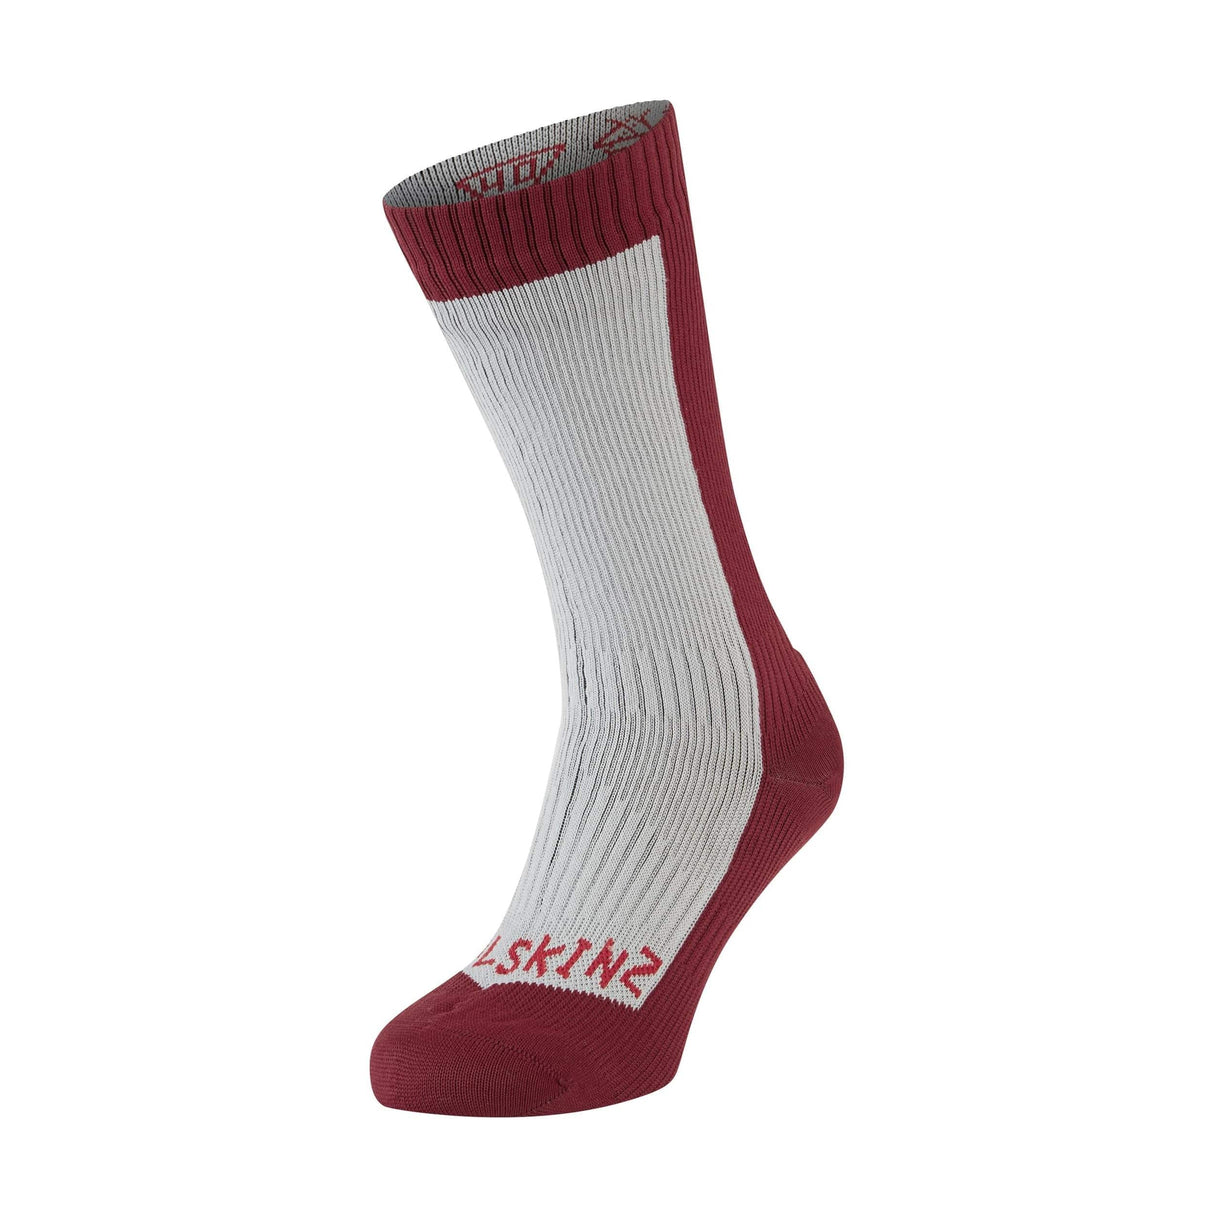 Sealskinz Starston Waterproof Cold Weather Mid Socks  -  Small / Gray/Red